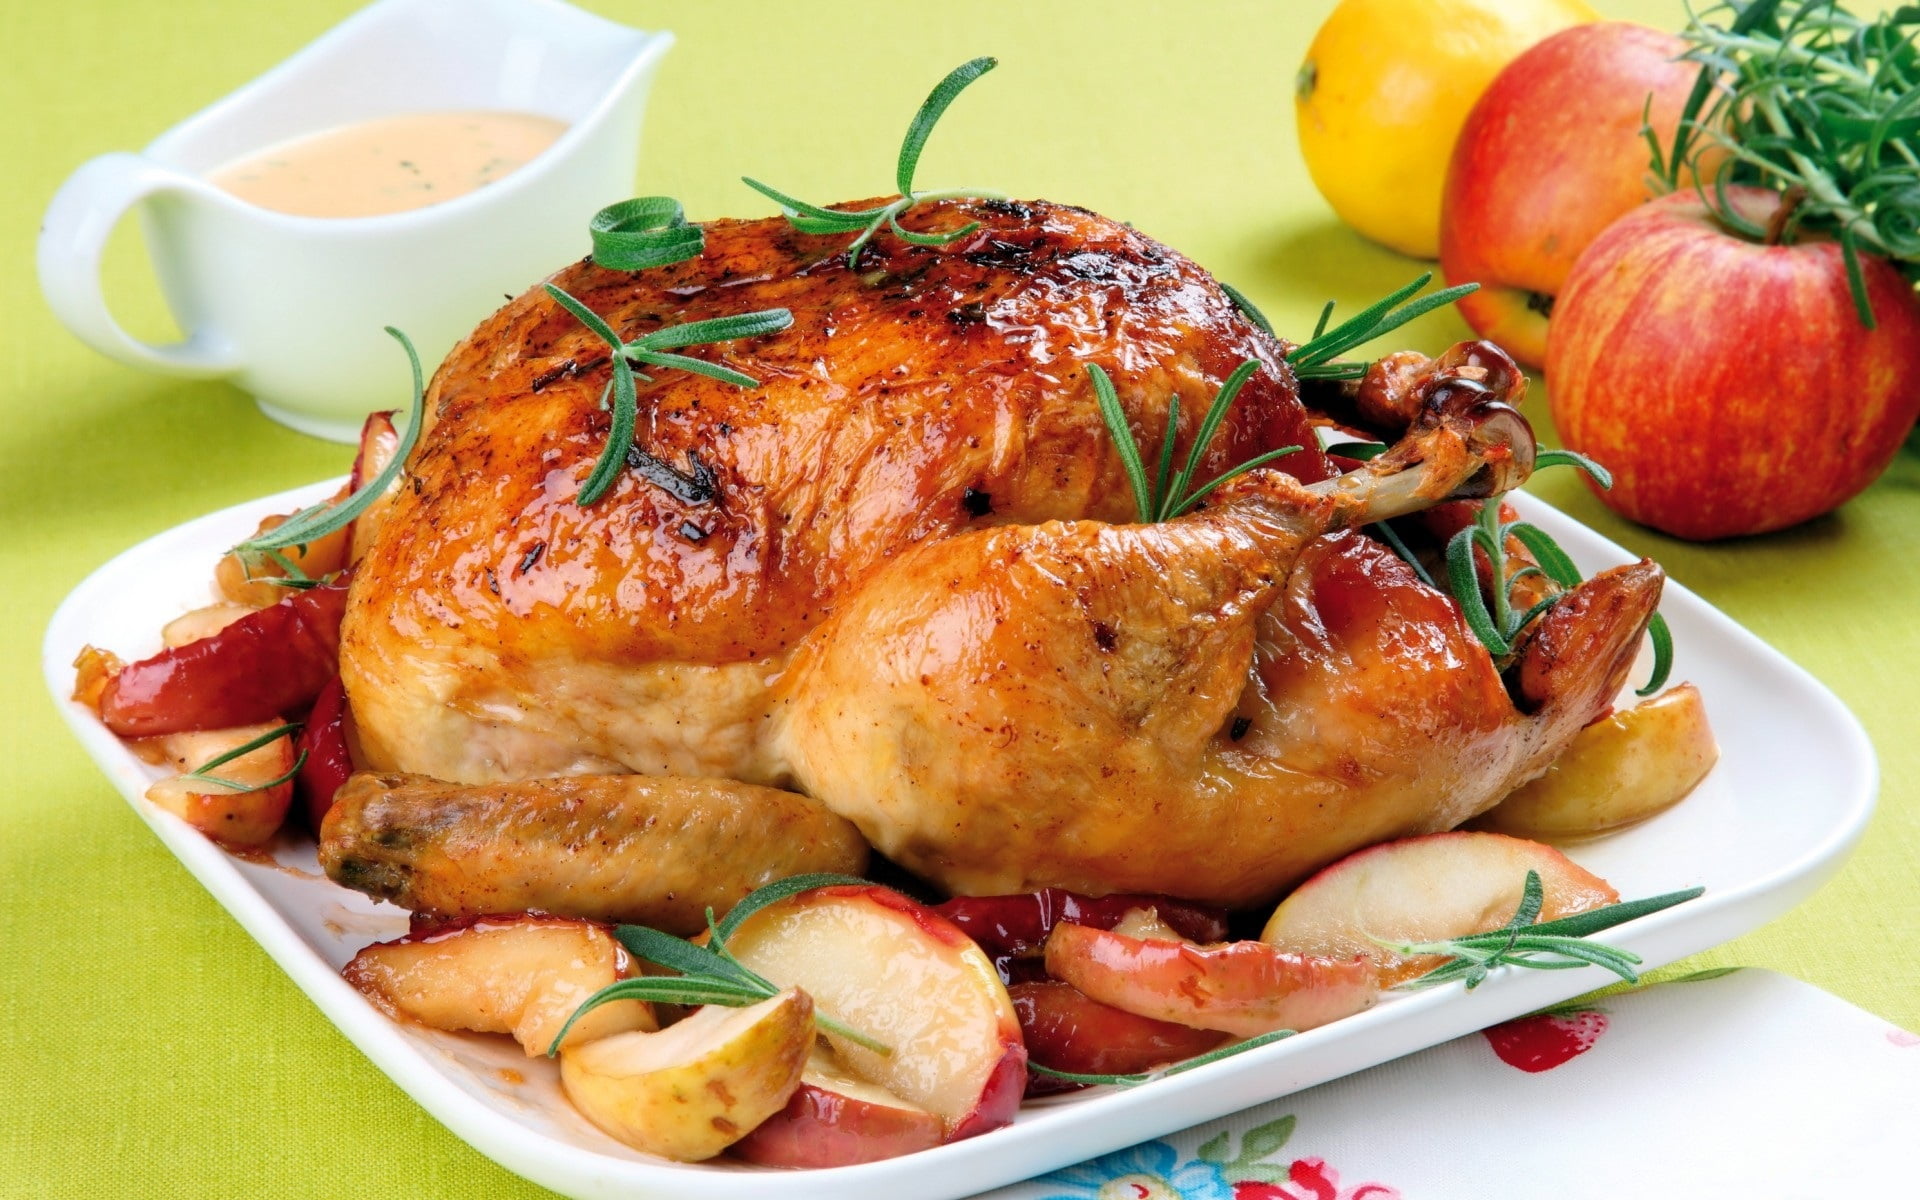 roasted chicken, apples, sauce, dish, food and drink, ready-to-eat